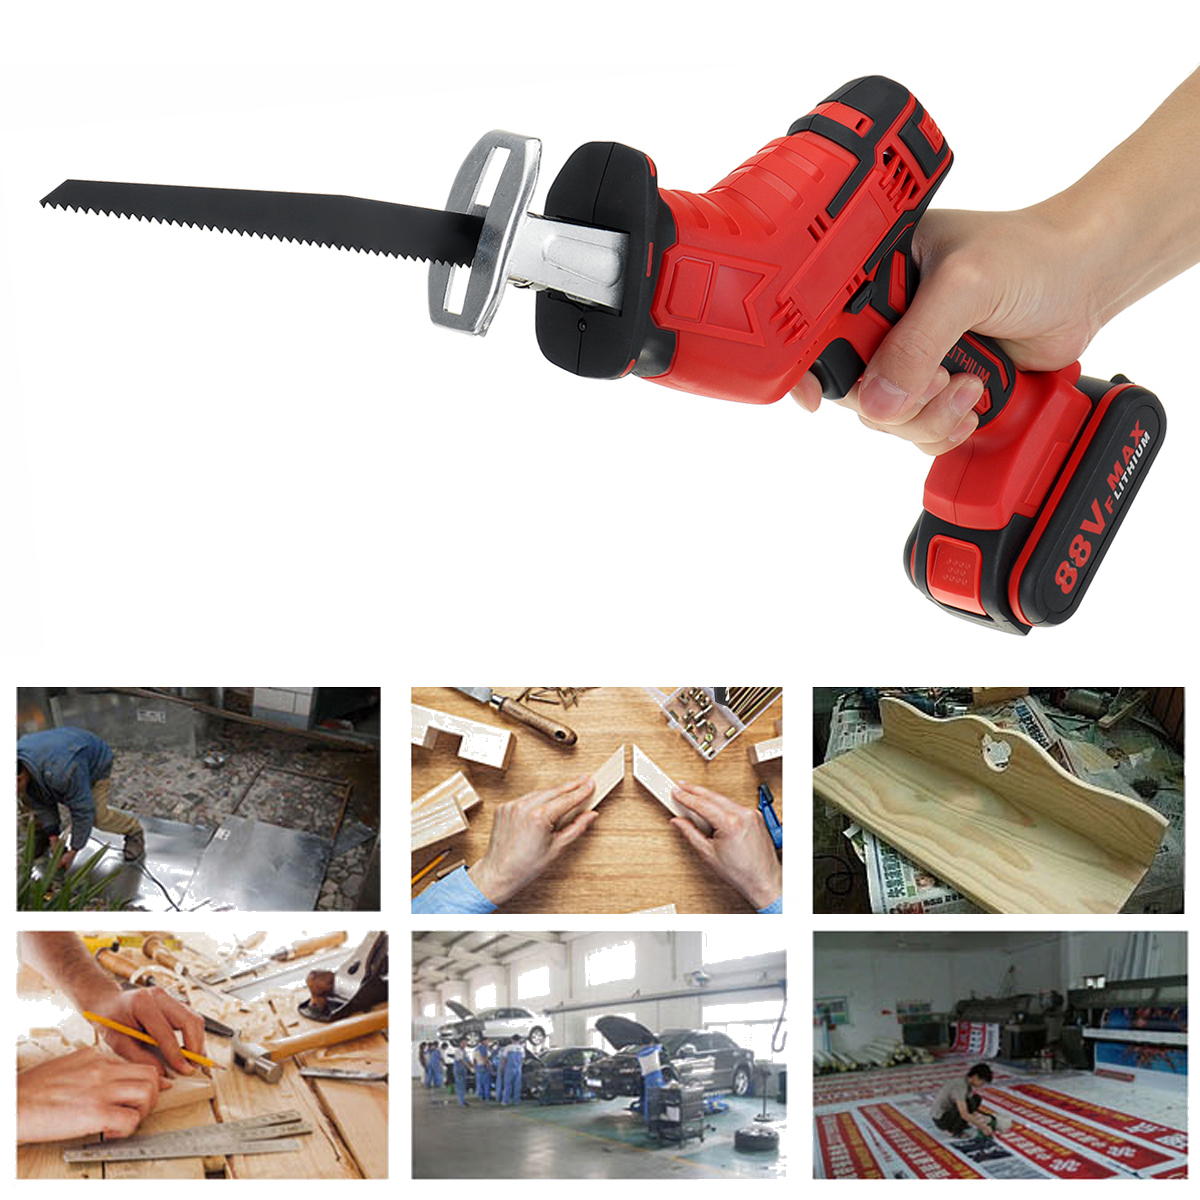 88VF-Electric-Reciprocating-Saws-Outdoor-Woodworking-Cordless-Portable-Saw-With-Blade-1721109-3